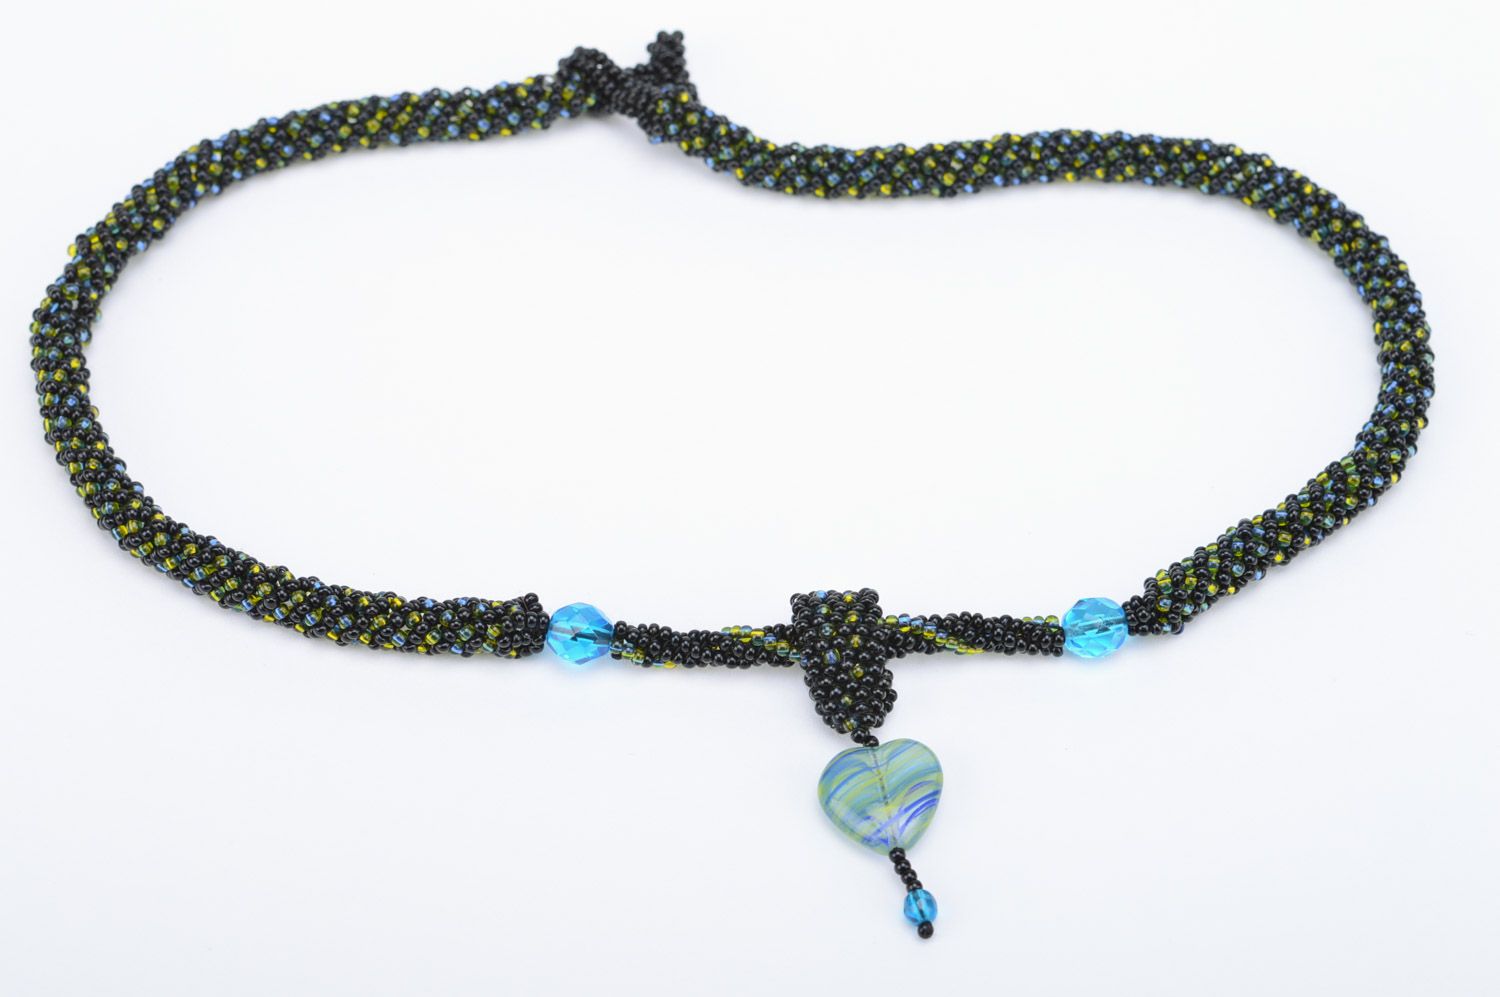 Black handmade beaded cord necklace with heart-shaped pendant photo 5